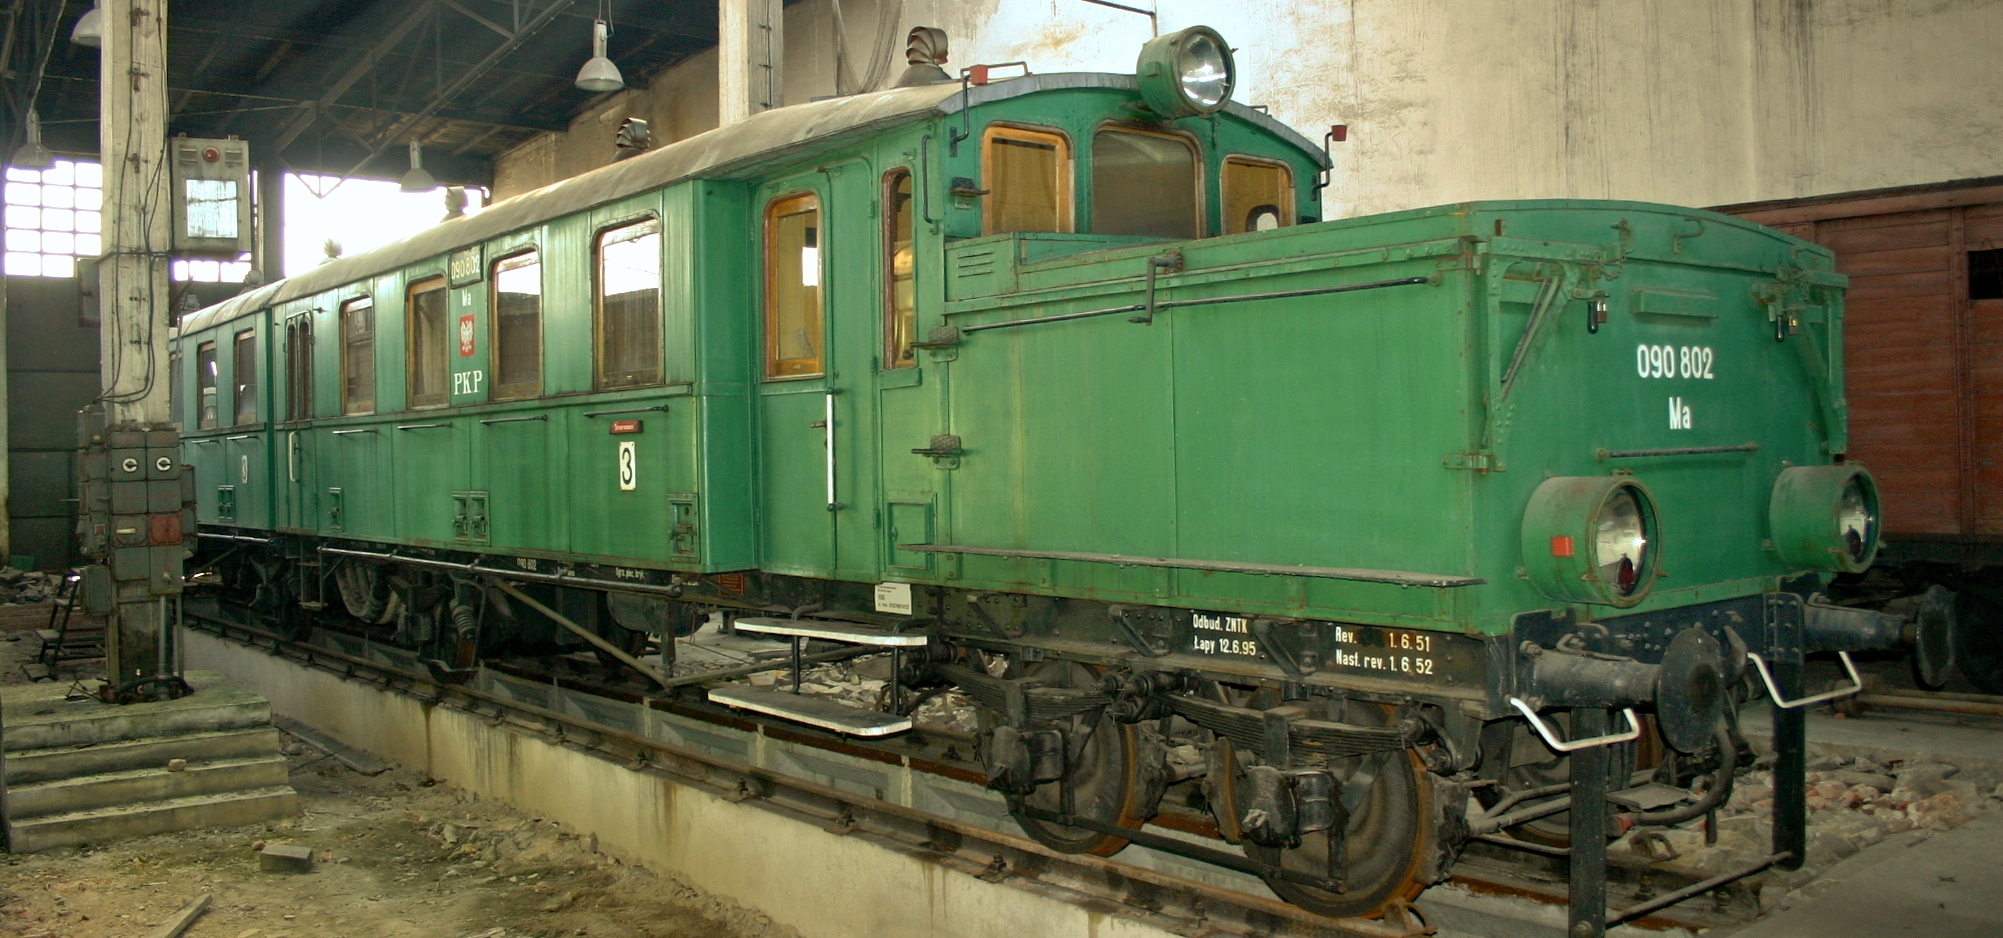 Prussian battery railcar of the Wittfeld type with batteries in the frontal hoods